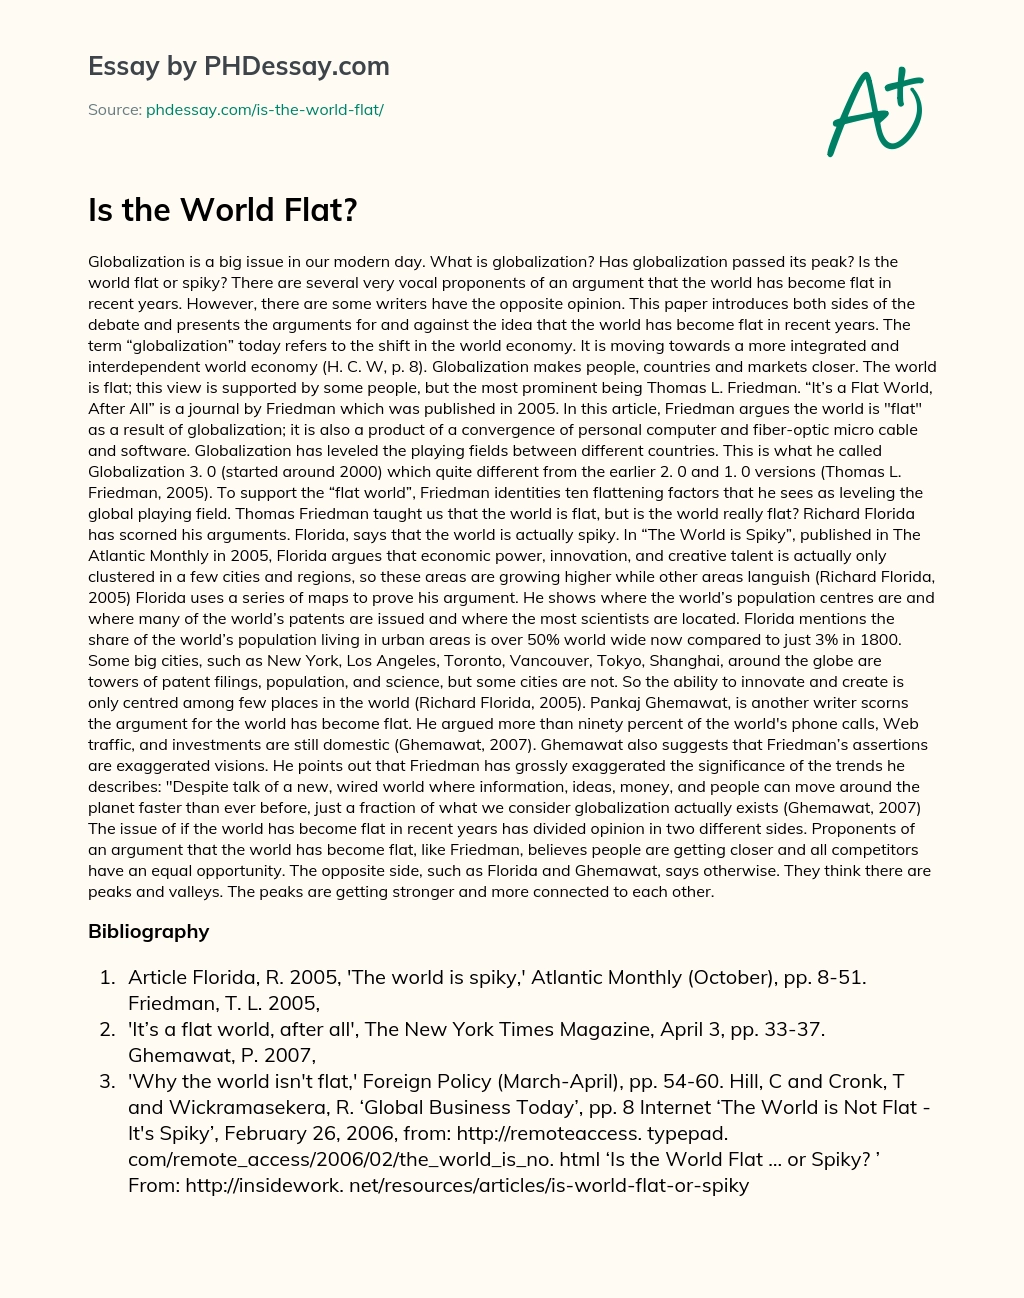 Is the World Flat? essay